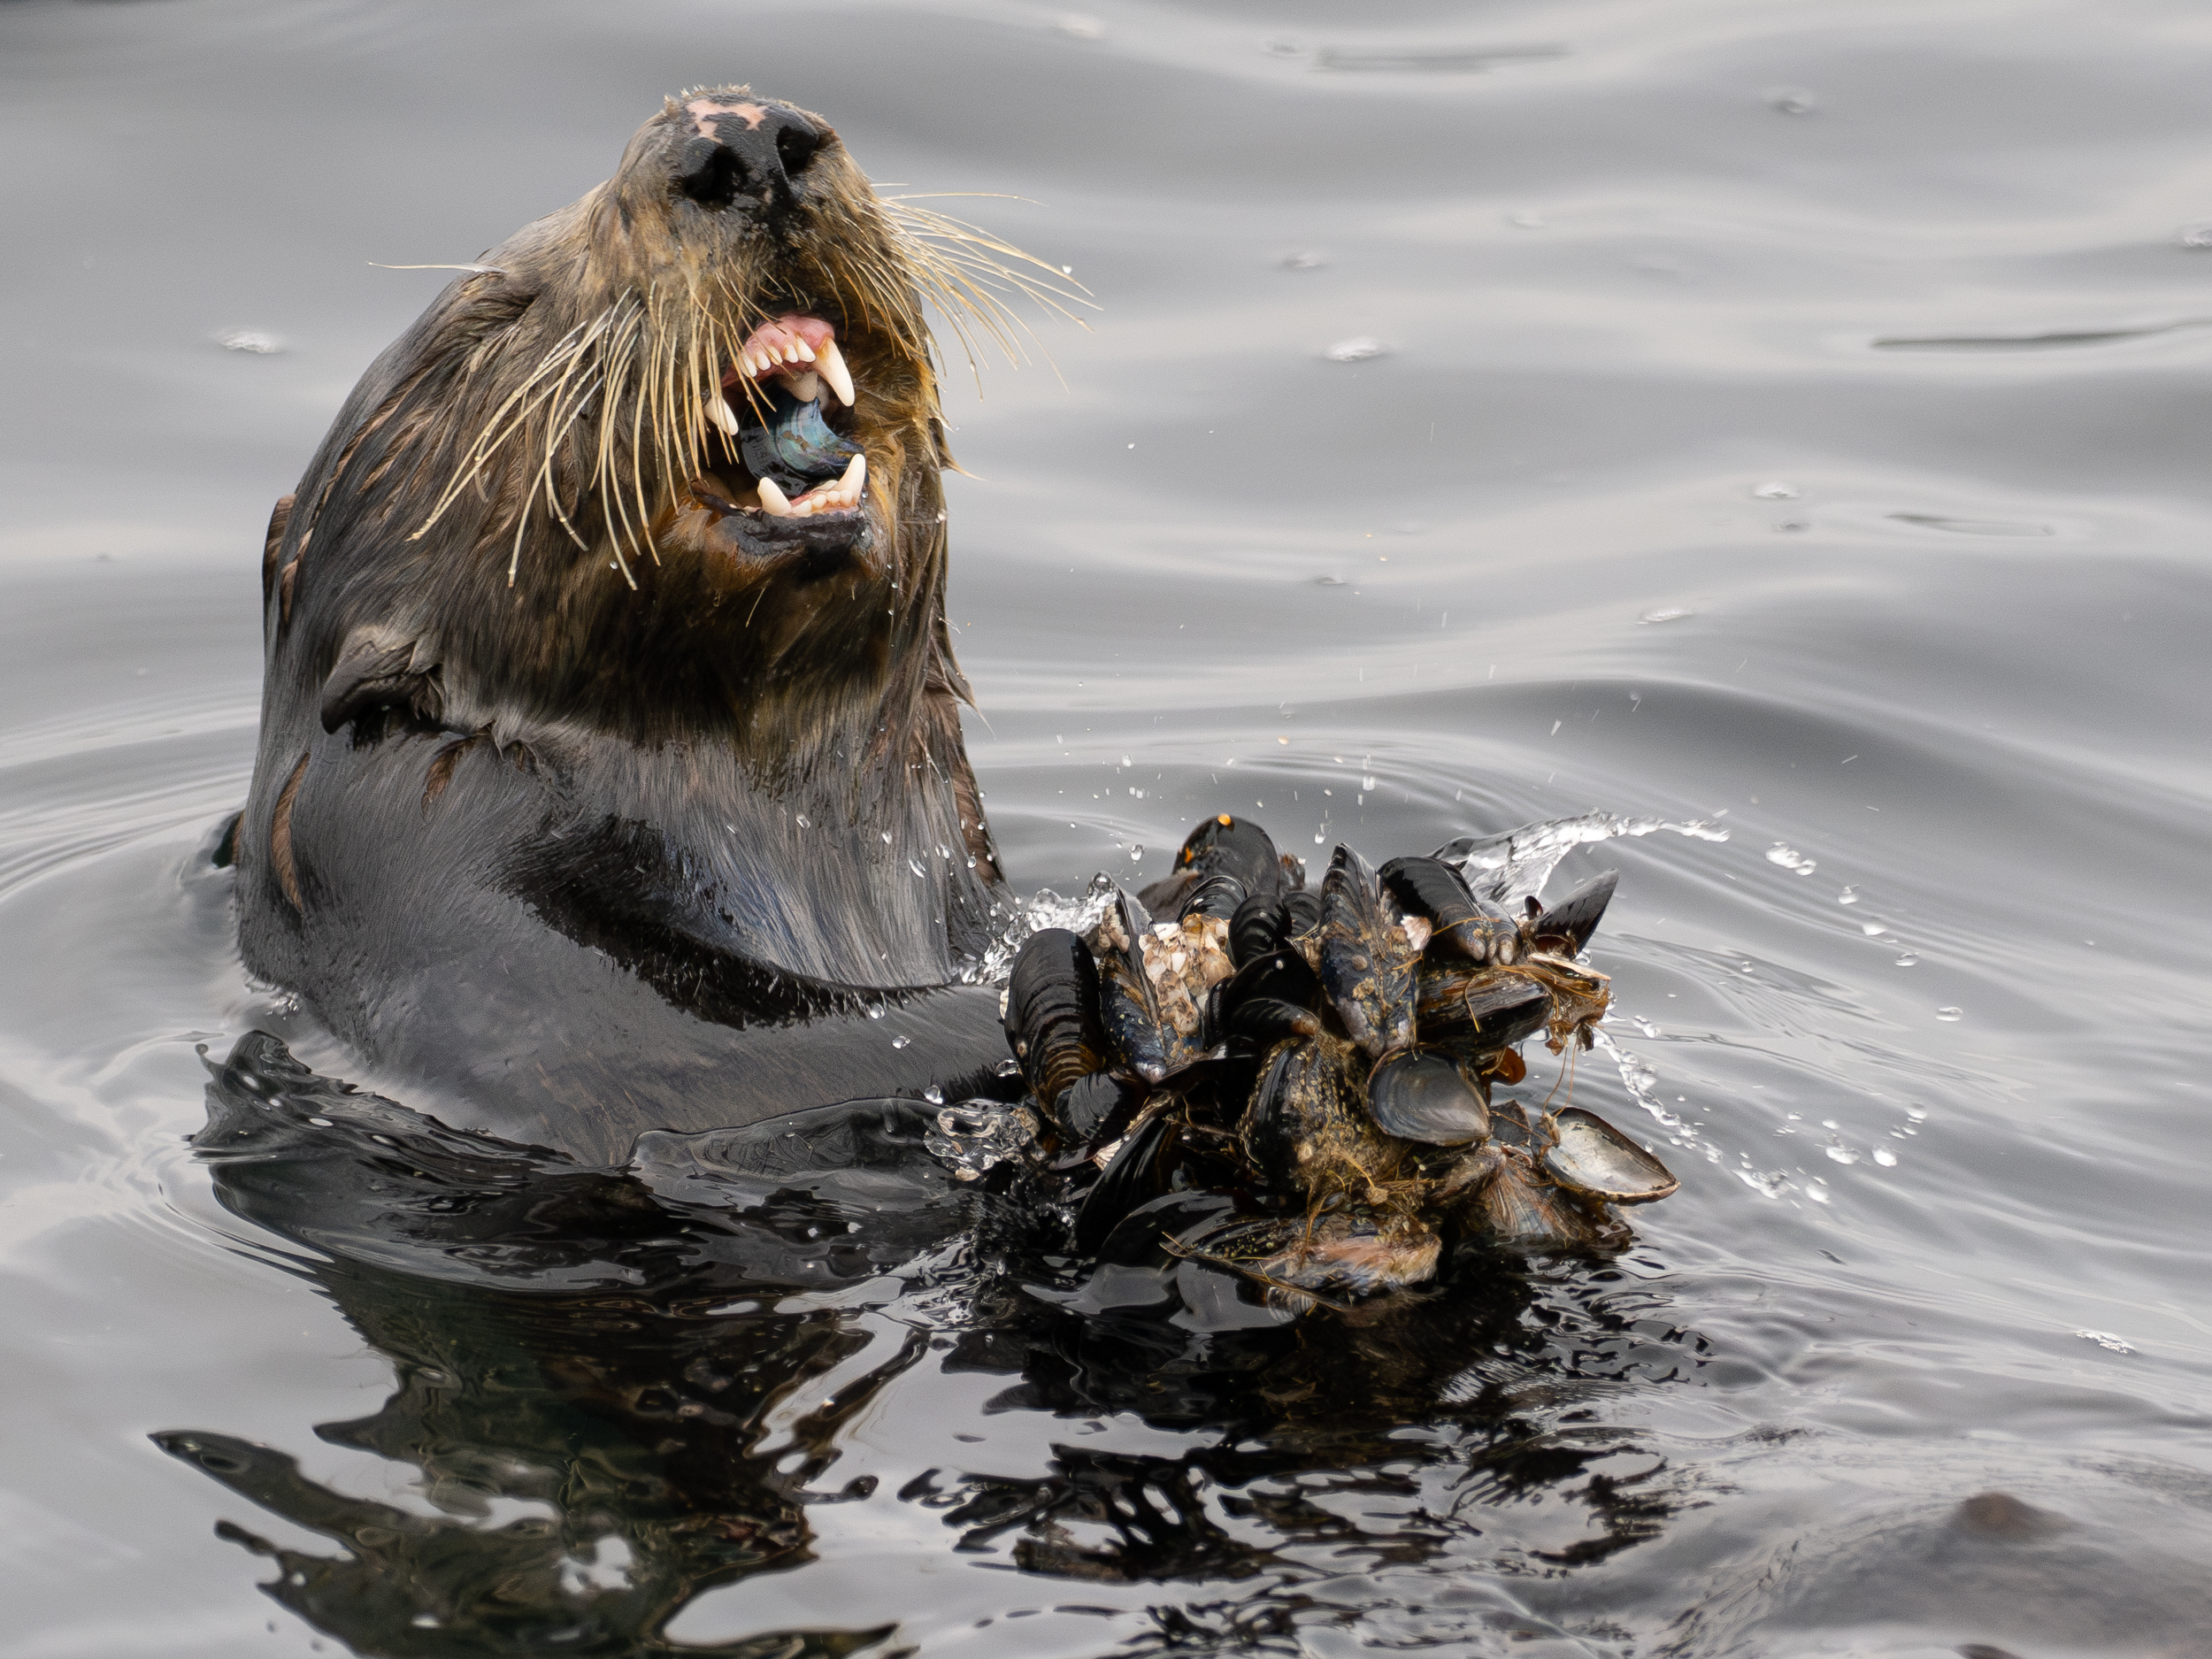 Southern Sea Otter with Large Cluster of Mussels on Monterey Bay